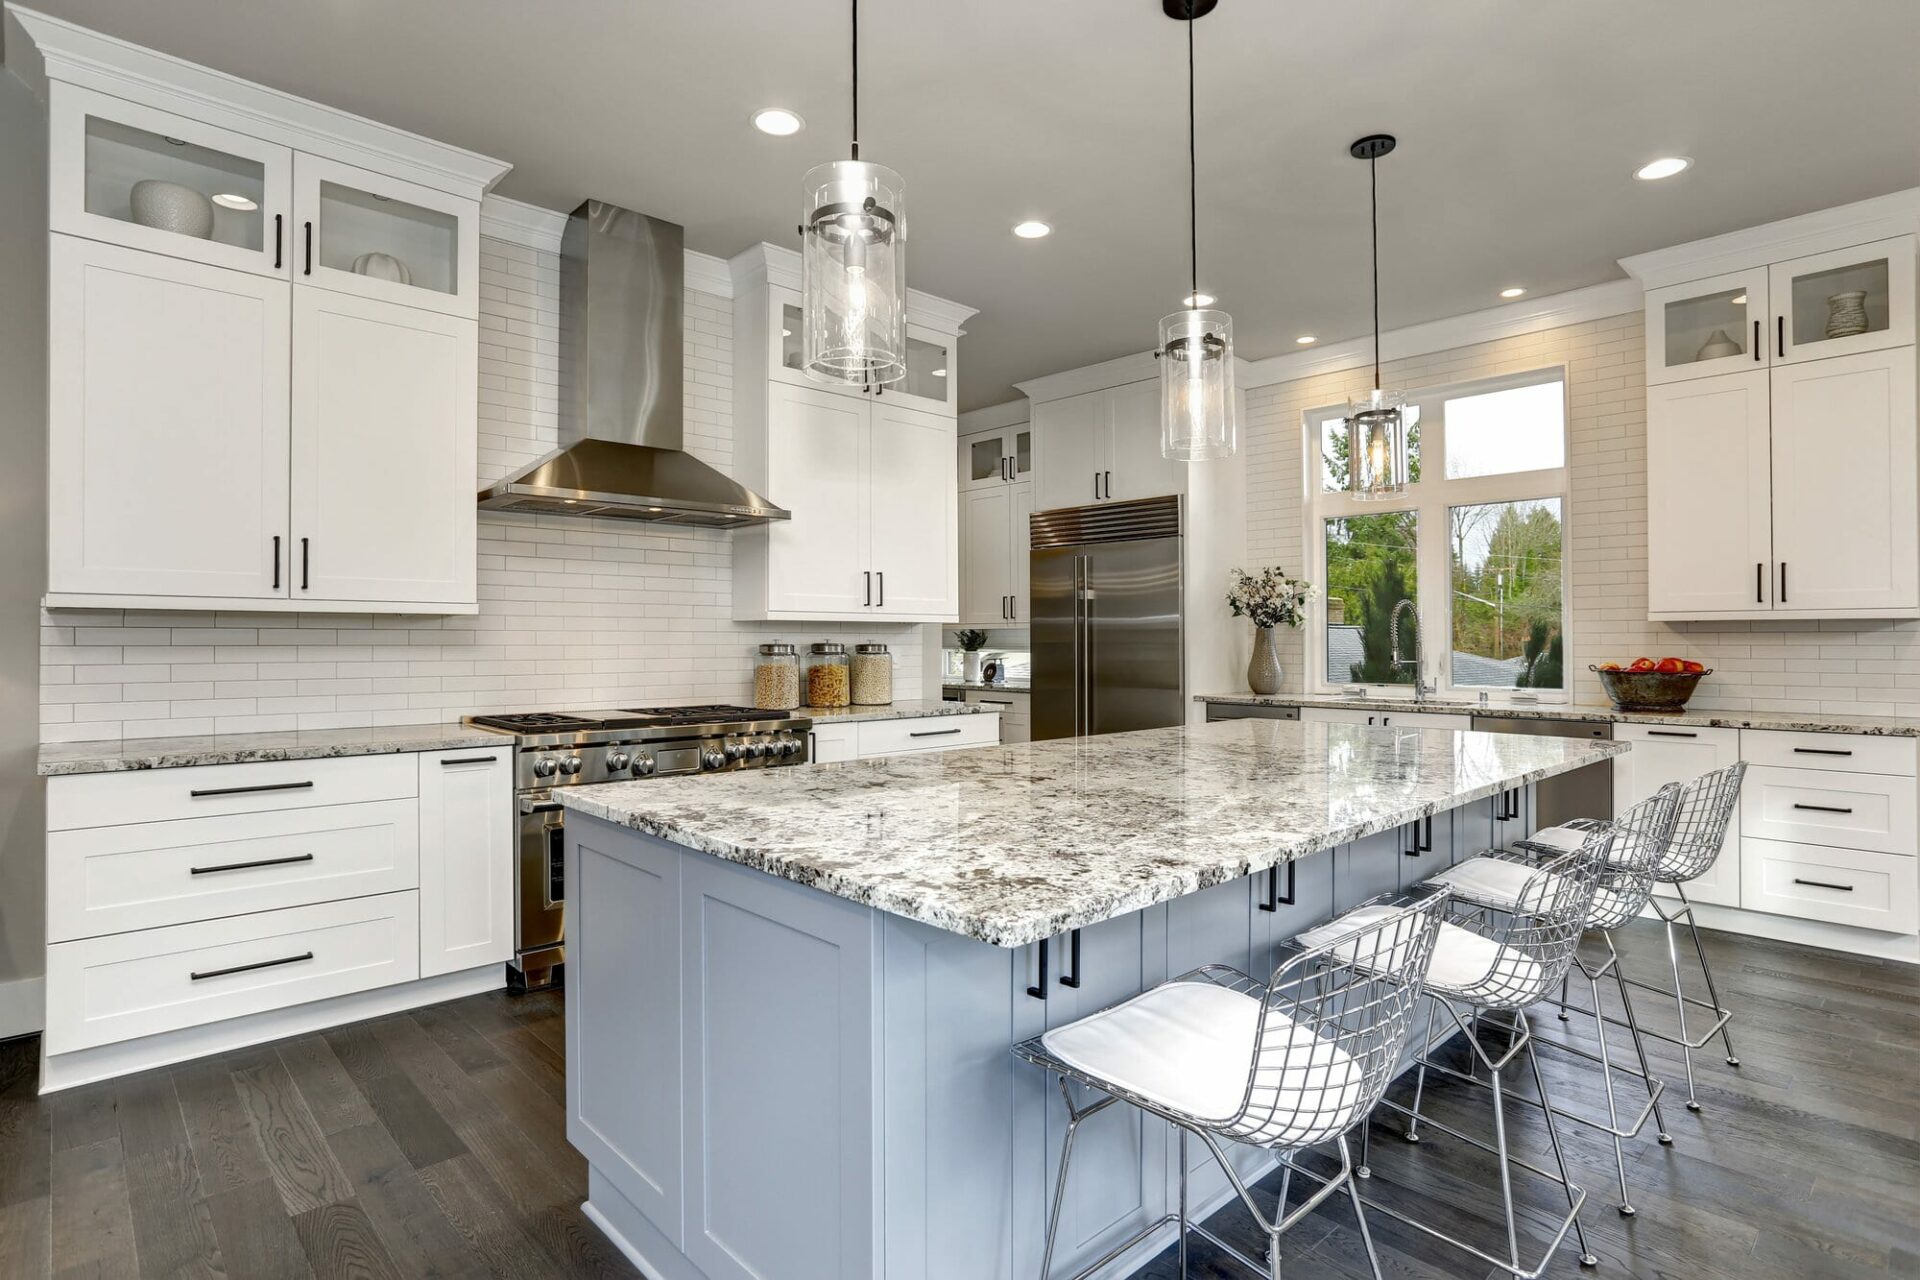 A kitchen with a grey granite countertop, white cabinets, and glass lighting fixtures.